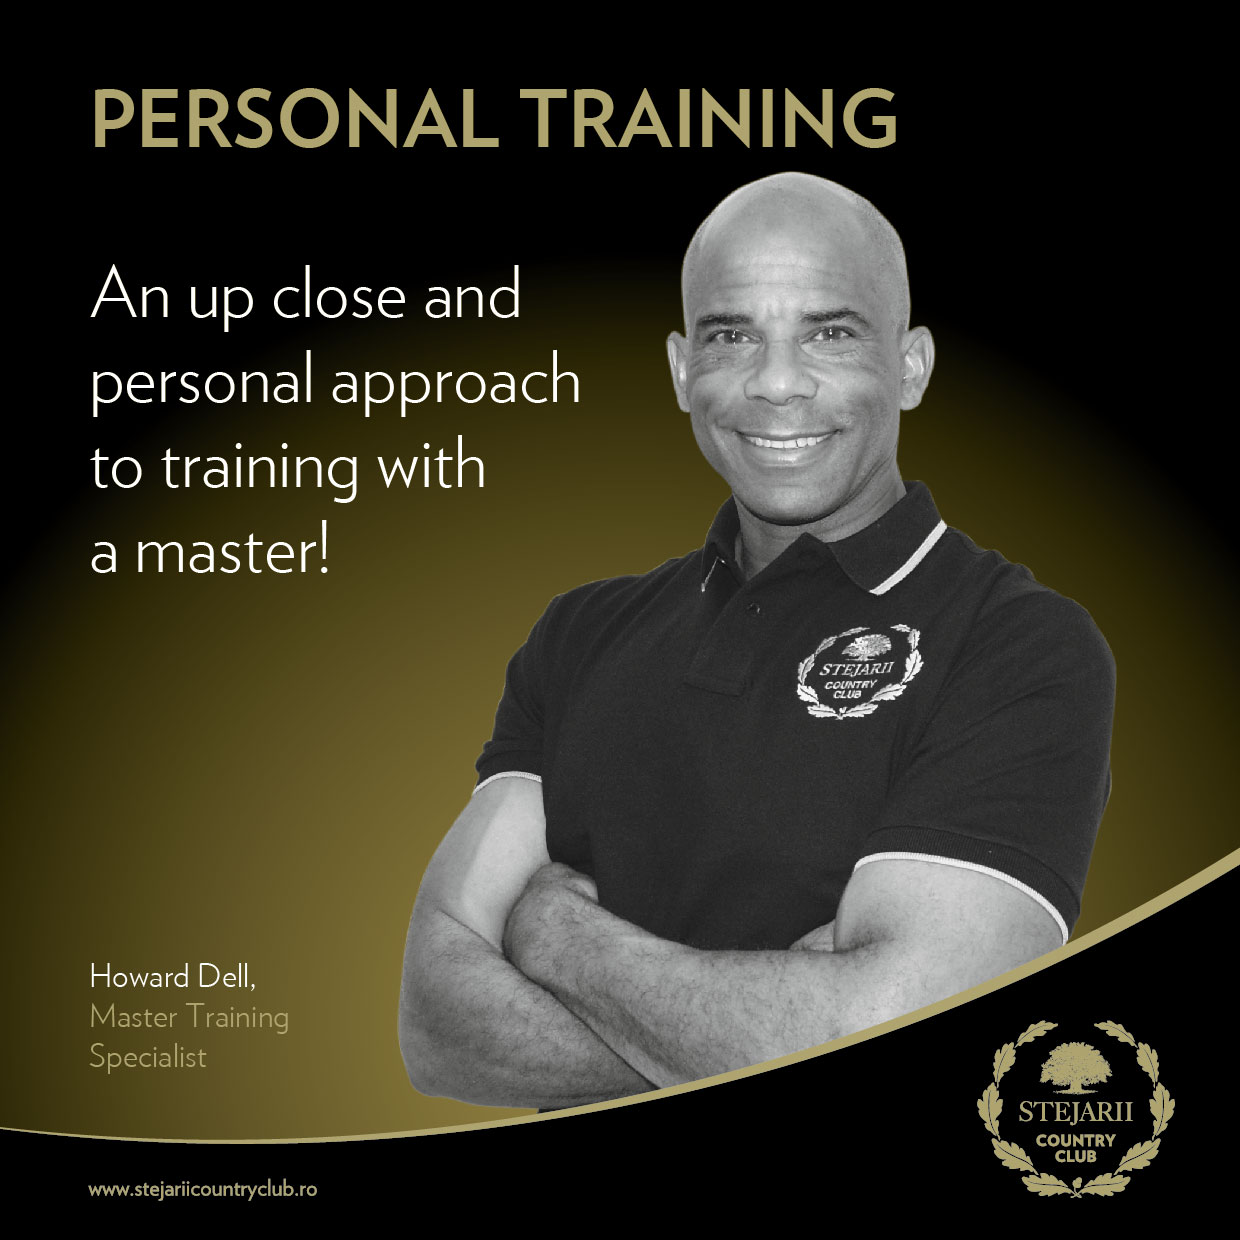 HOWARD DELL – Strength and Conditioning Specialist